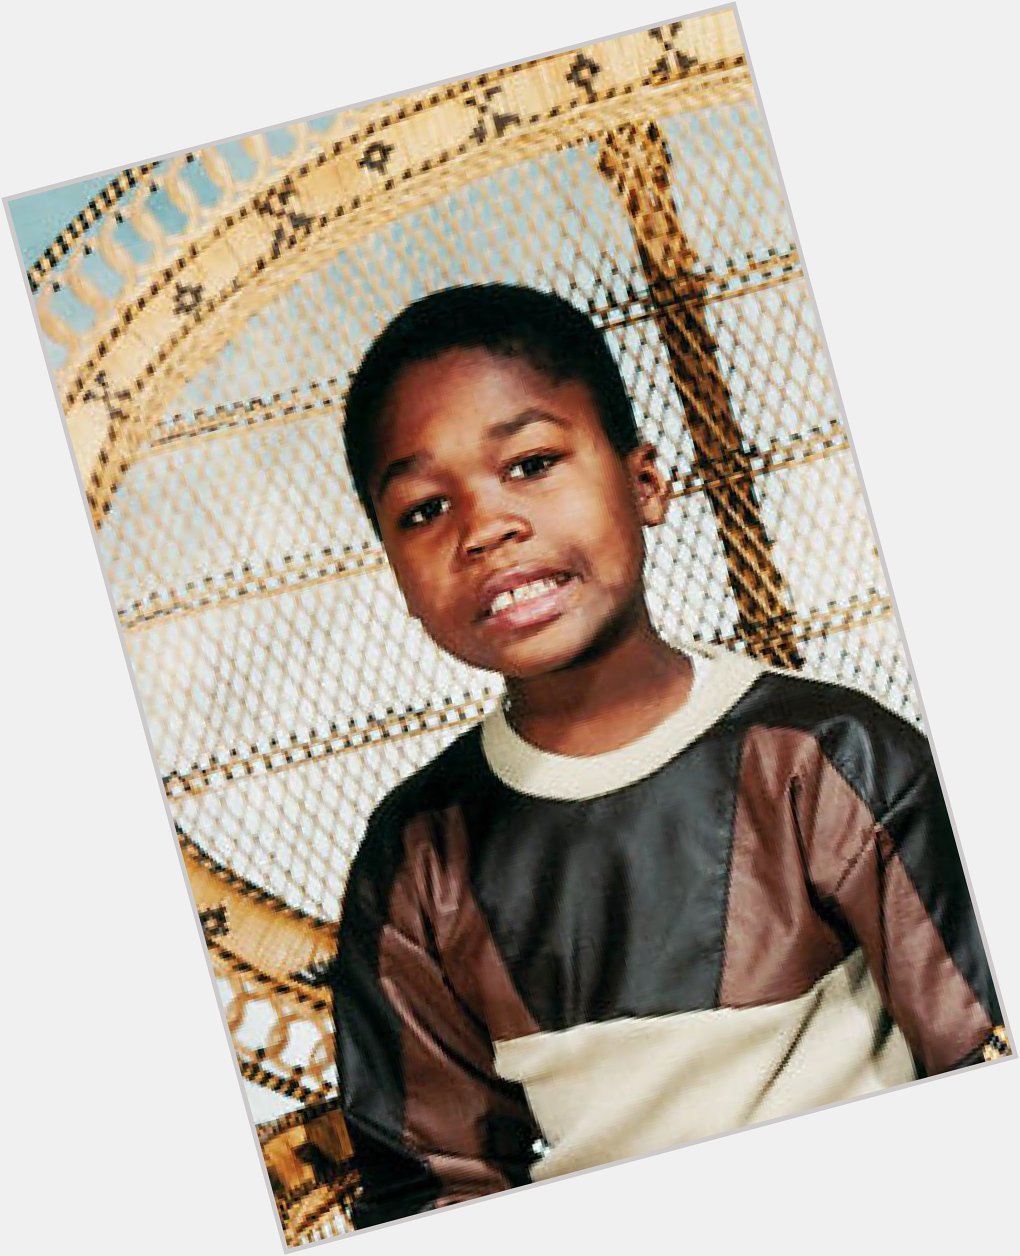 42 years ago today, Curtis James Jackson III was born.

Happy Birthday to 50 Cent! 